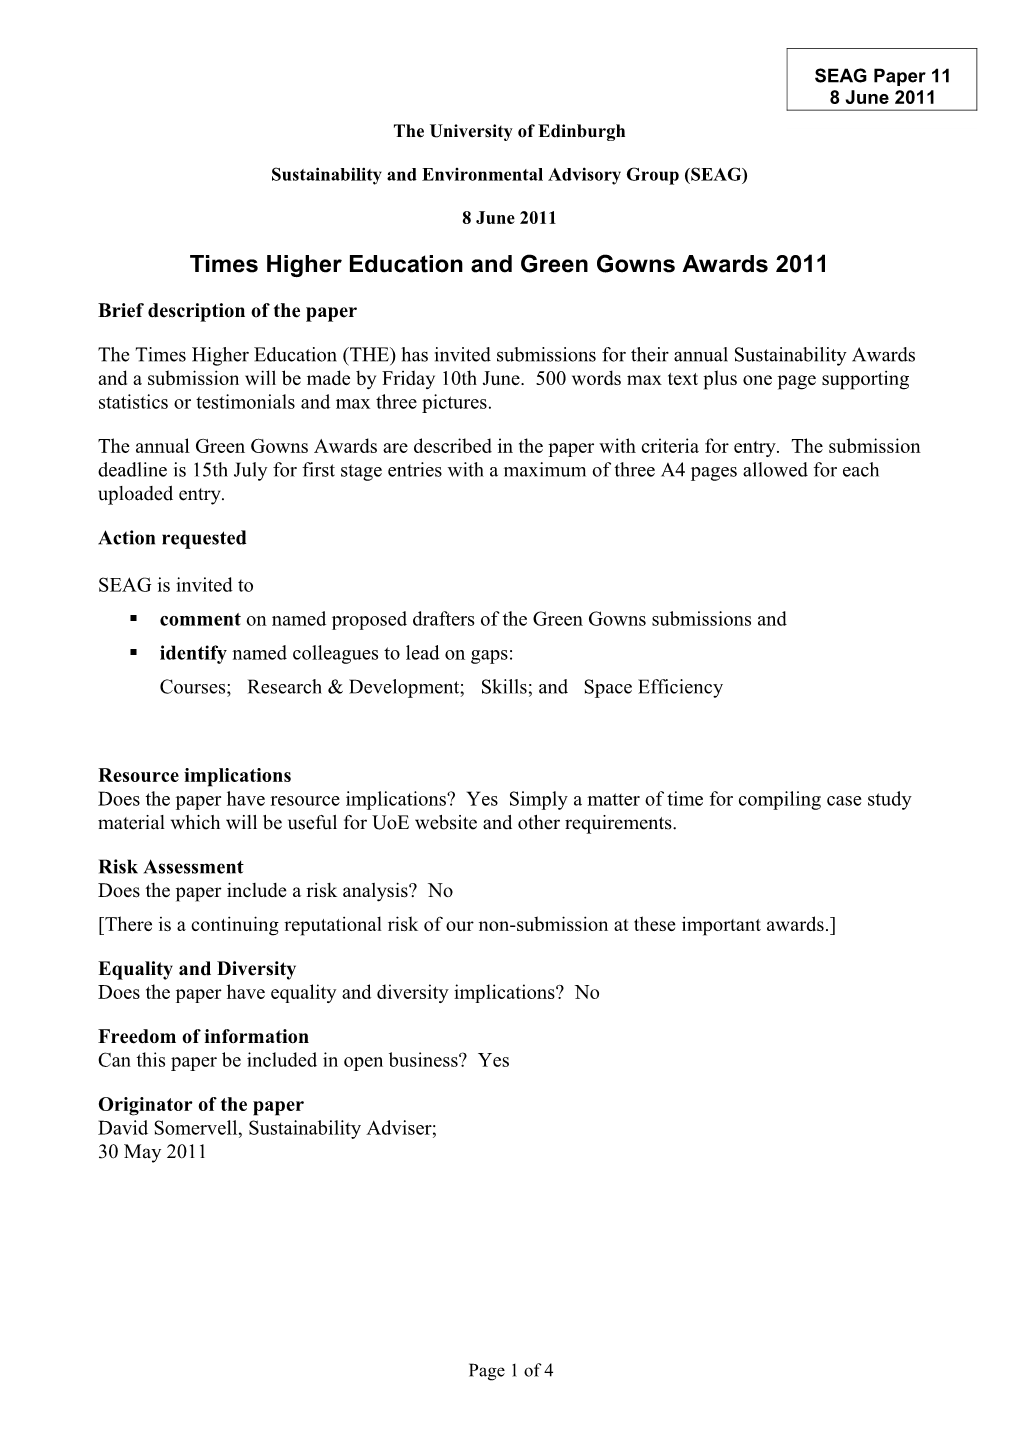 Announcing the Green Gown Awards 2011